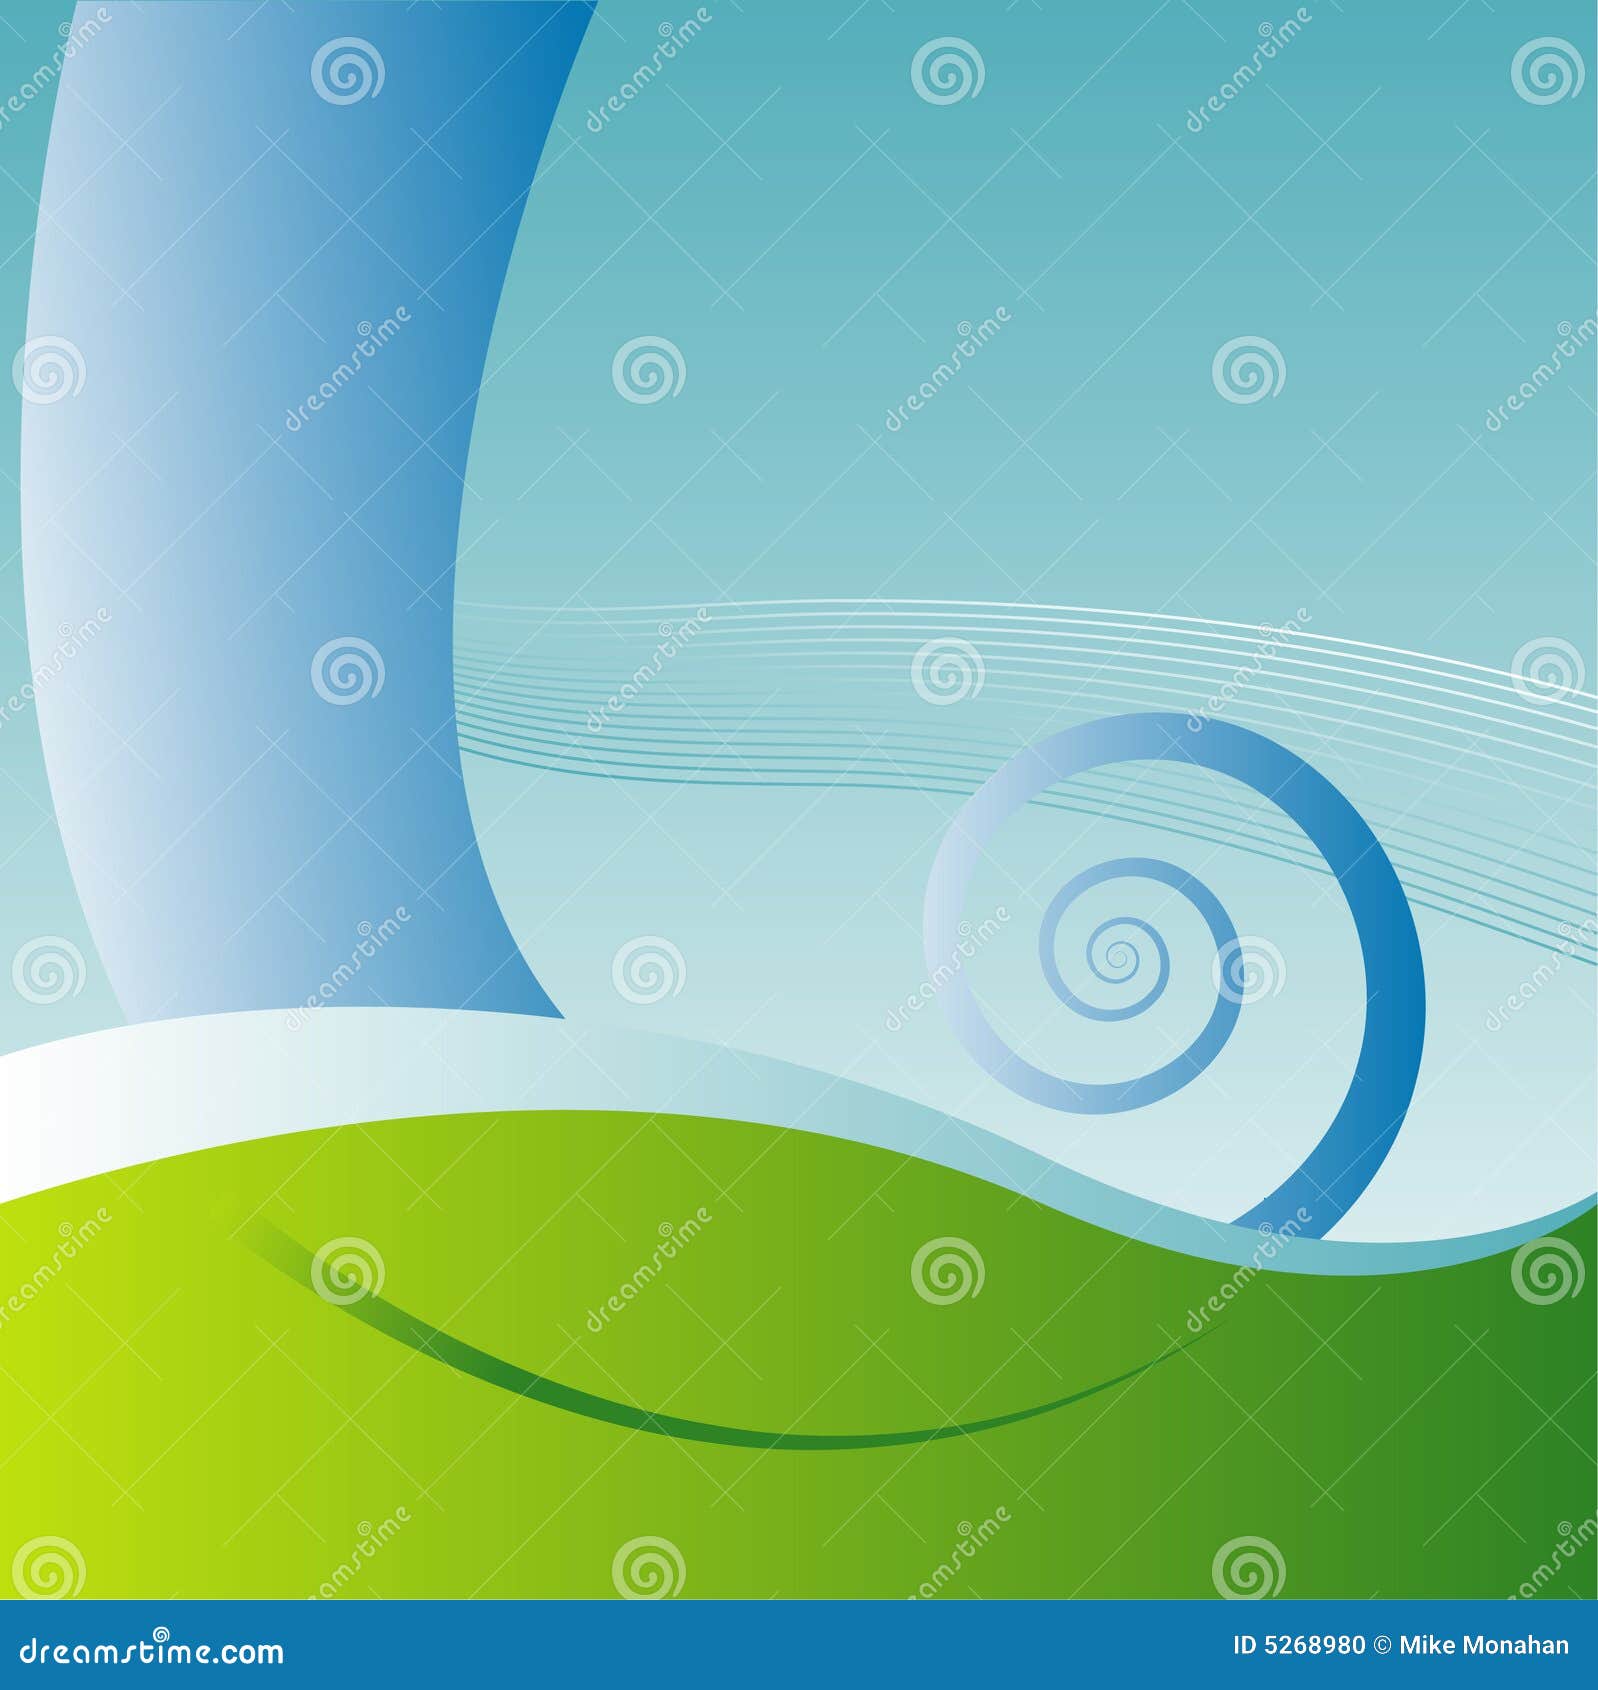 abstract aquatic background